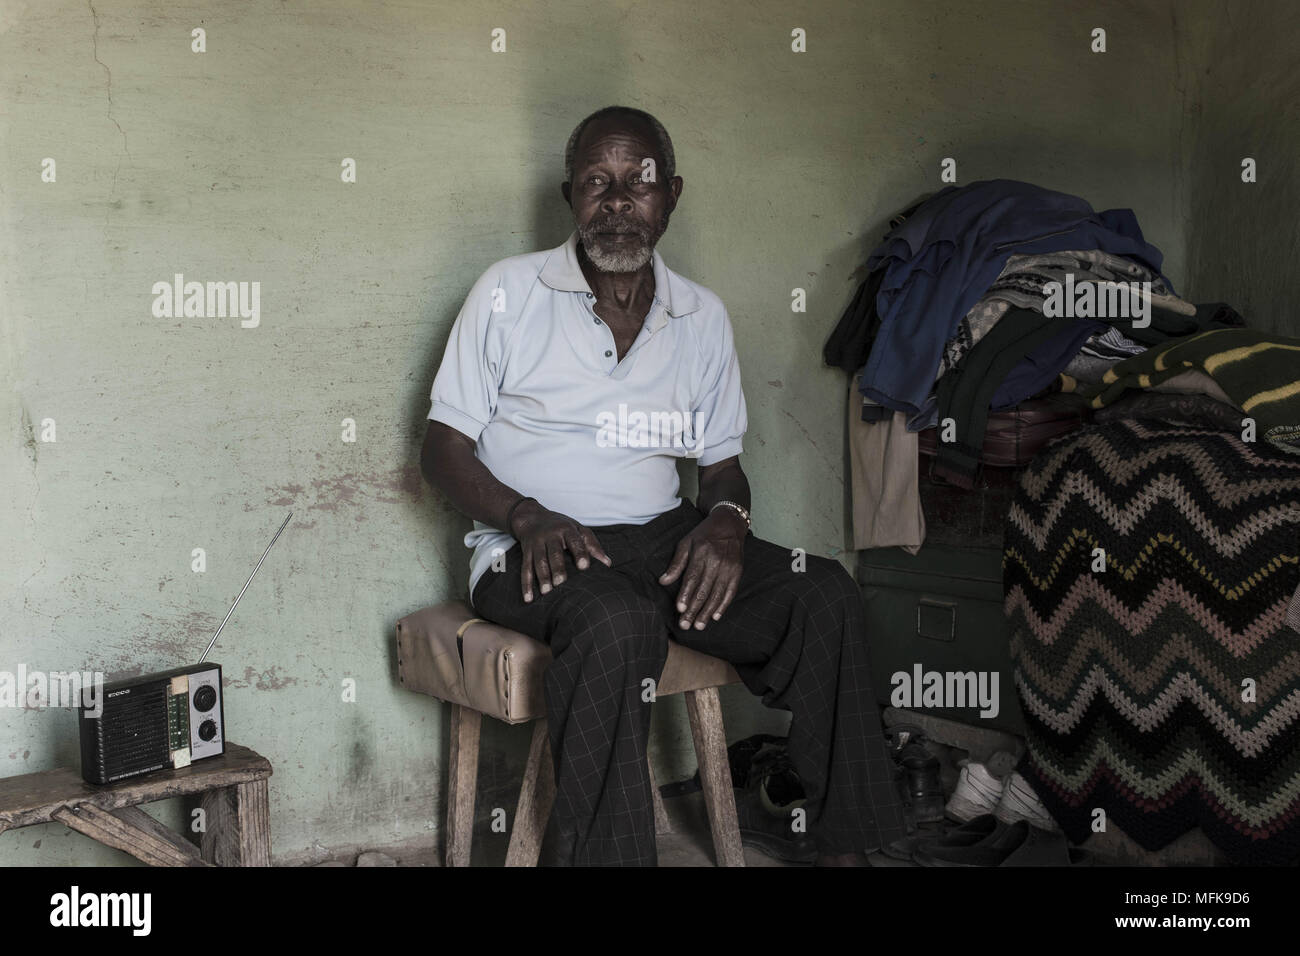 January 12, 2018 - Matatiele, Eastern Cape, South Africa - Thabo, 72, sits in his mud house and listens to the radio. He complains that there is nothing to do and that life is hard. The government has promised them all kinds of things, but has not delivered their promises..'We are not really living here. They have forgotten about us. (Credit Image: © Stefan Kleinowitz via ZUMA Wire) Stock Photo